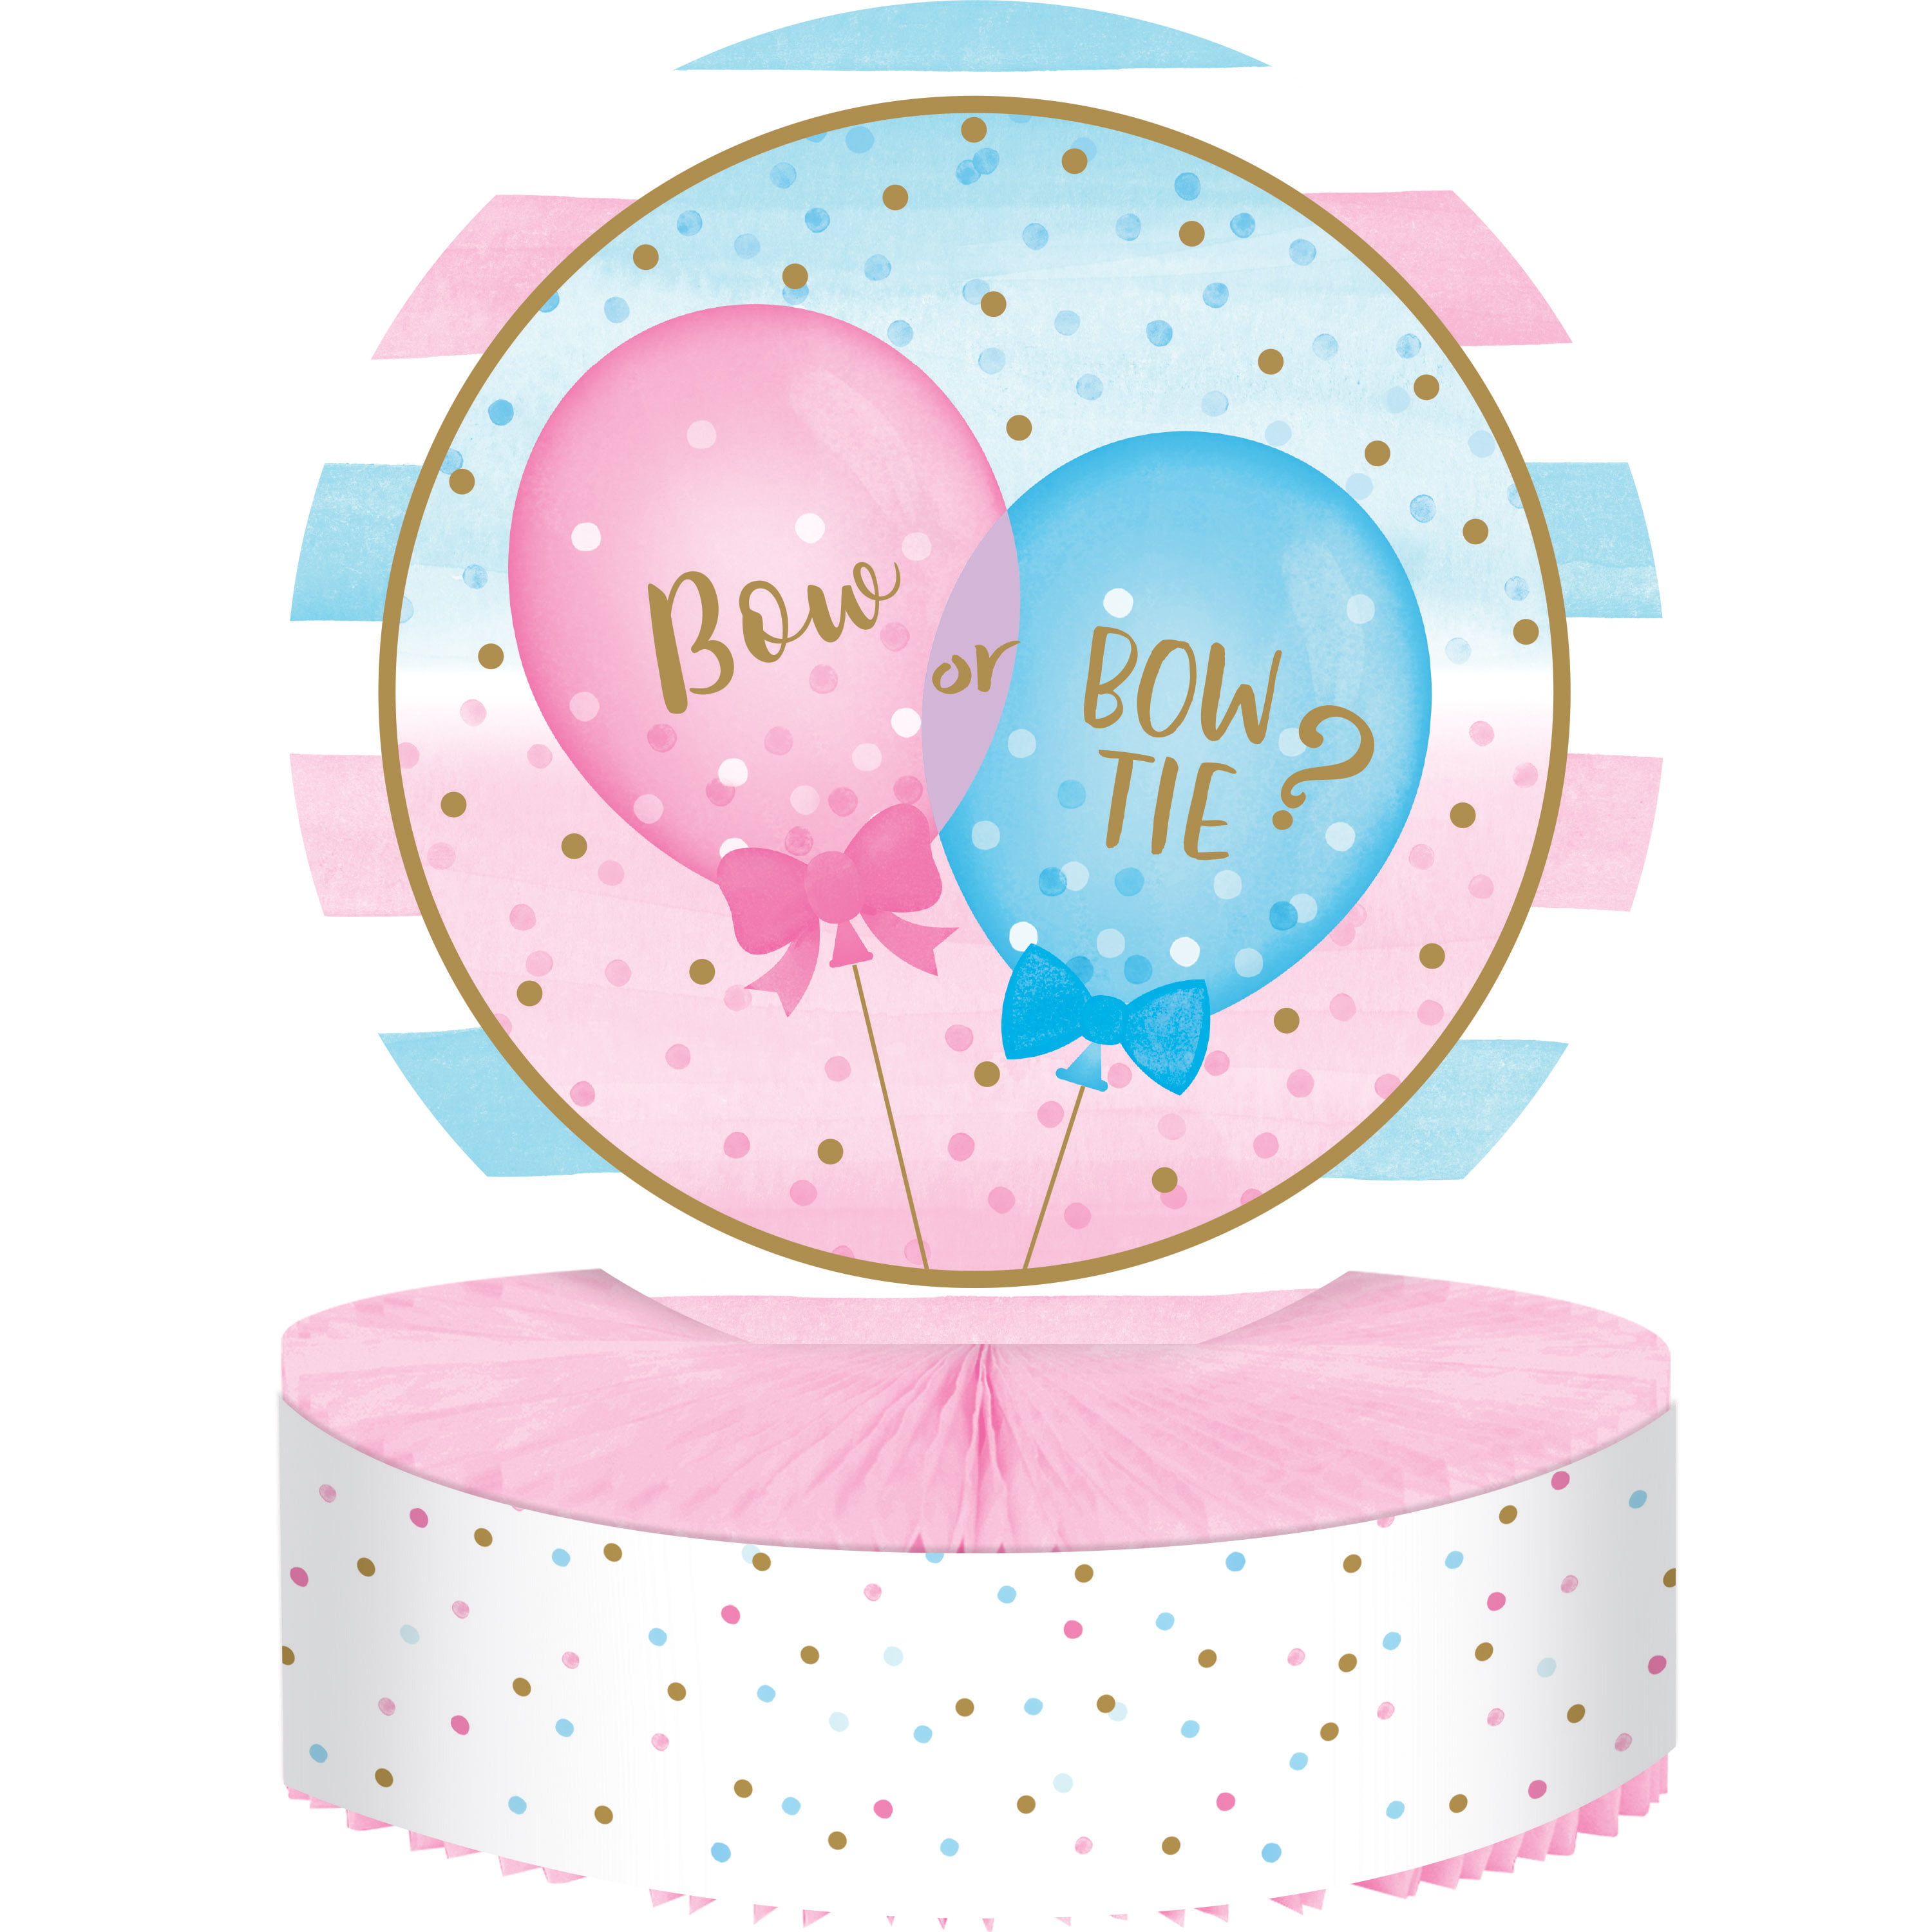 OURUOLA ouruola pink blue-gold party-decorations streamers lanterns - 14pcs  gender reveal boy or girl birthday paper lanterns fan,tis